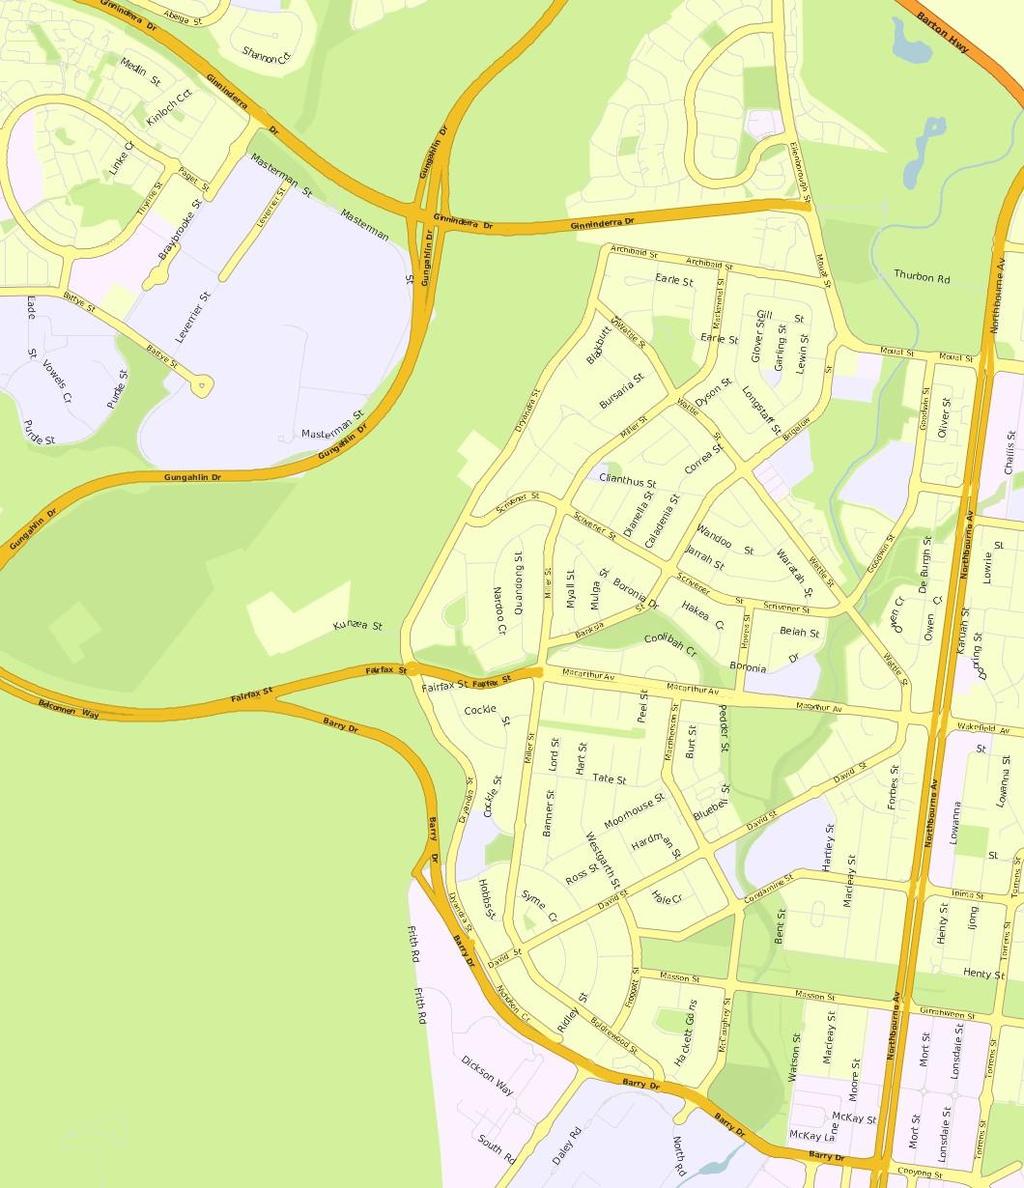 O'CONNOR Suburb Map Prepared on 0/0/08 by Your Property Expert, +6 (0) 67 600 at Ray White Canberra. Property Data Solutions Pty Ltd 08 (pricefinder.com.